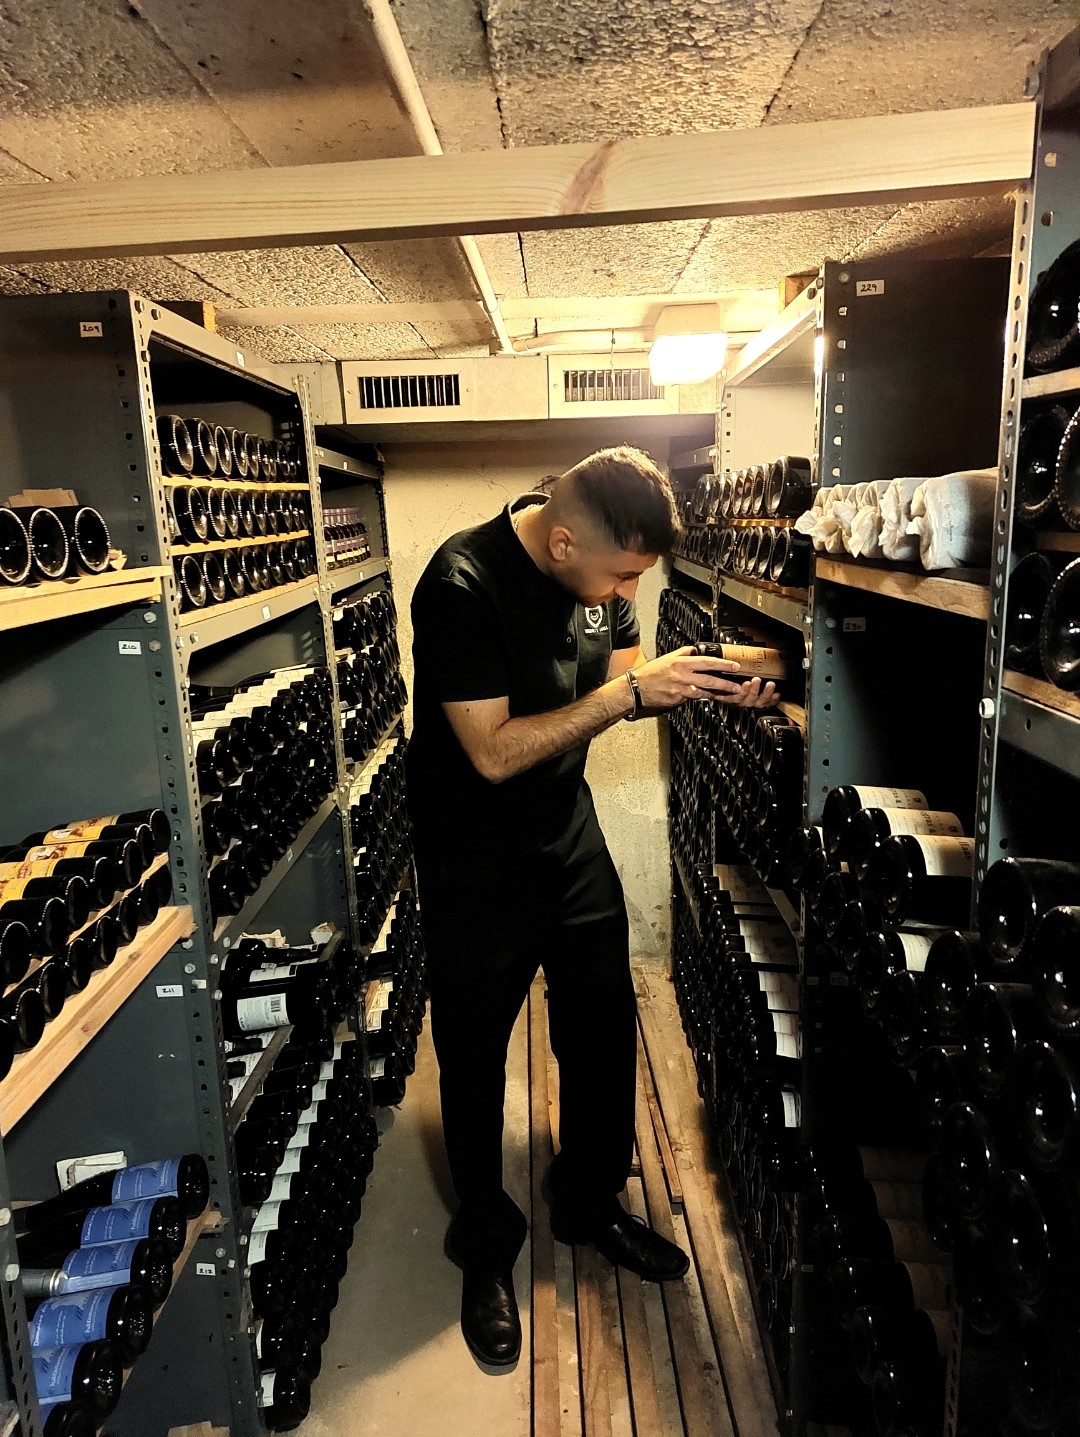 A passion for service: Gabriele Cirrottola in a wine cellar putting bottles in the racks. He is the new butler at Trinity Hall, Cambridge